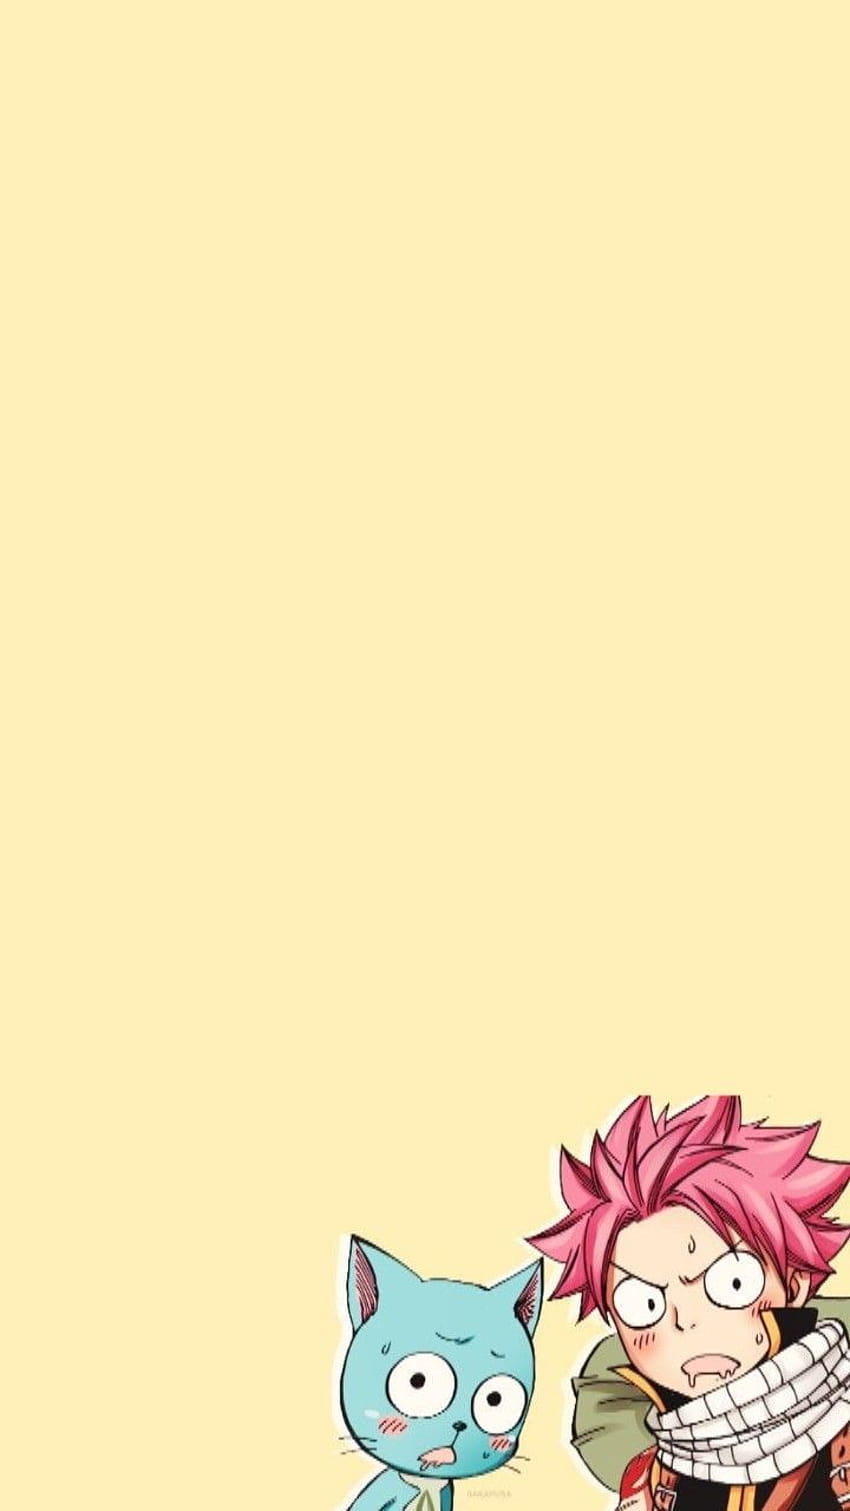 200+] Fairy Tail Wallpapers | Wallpapers.com